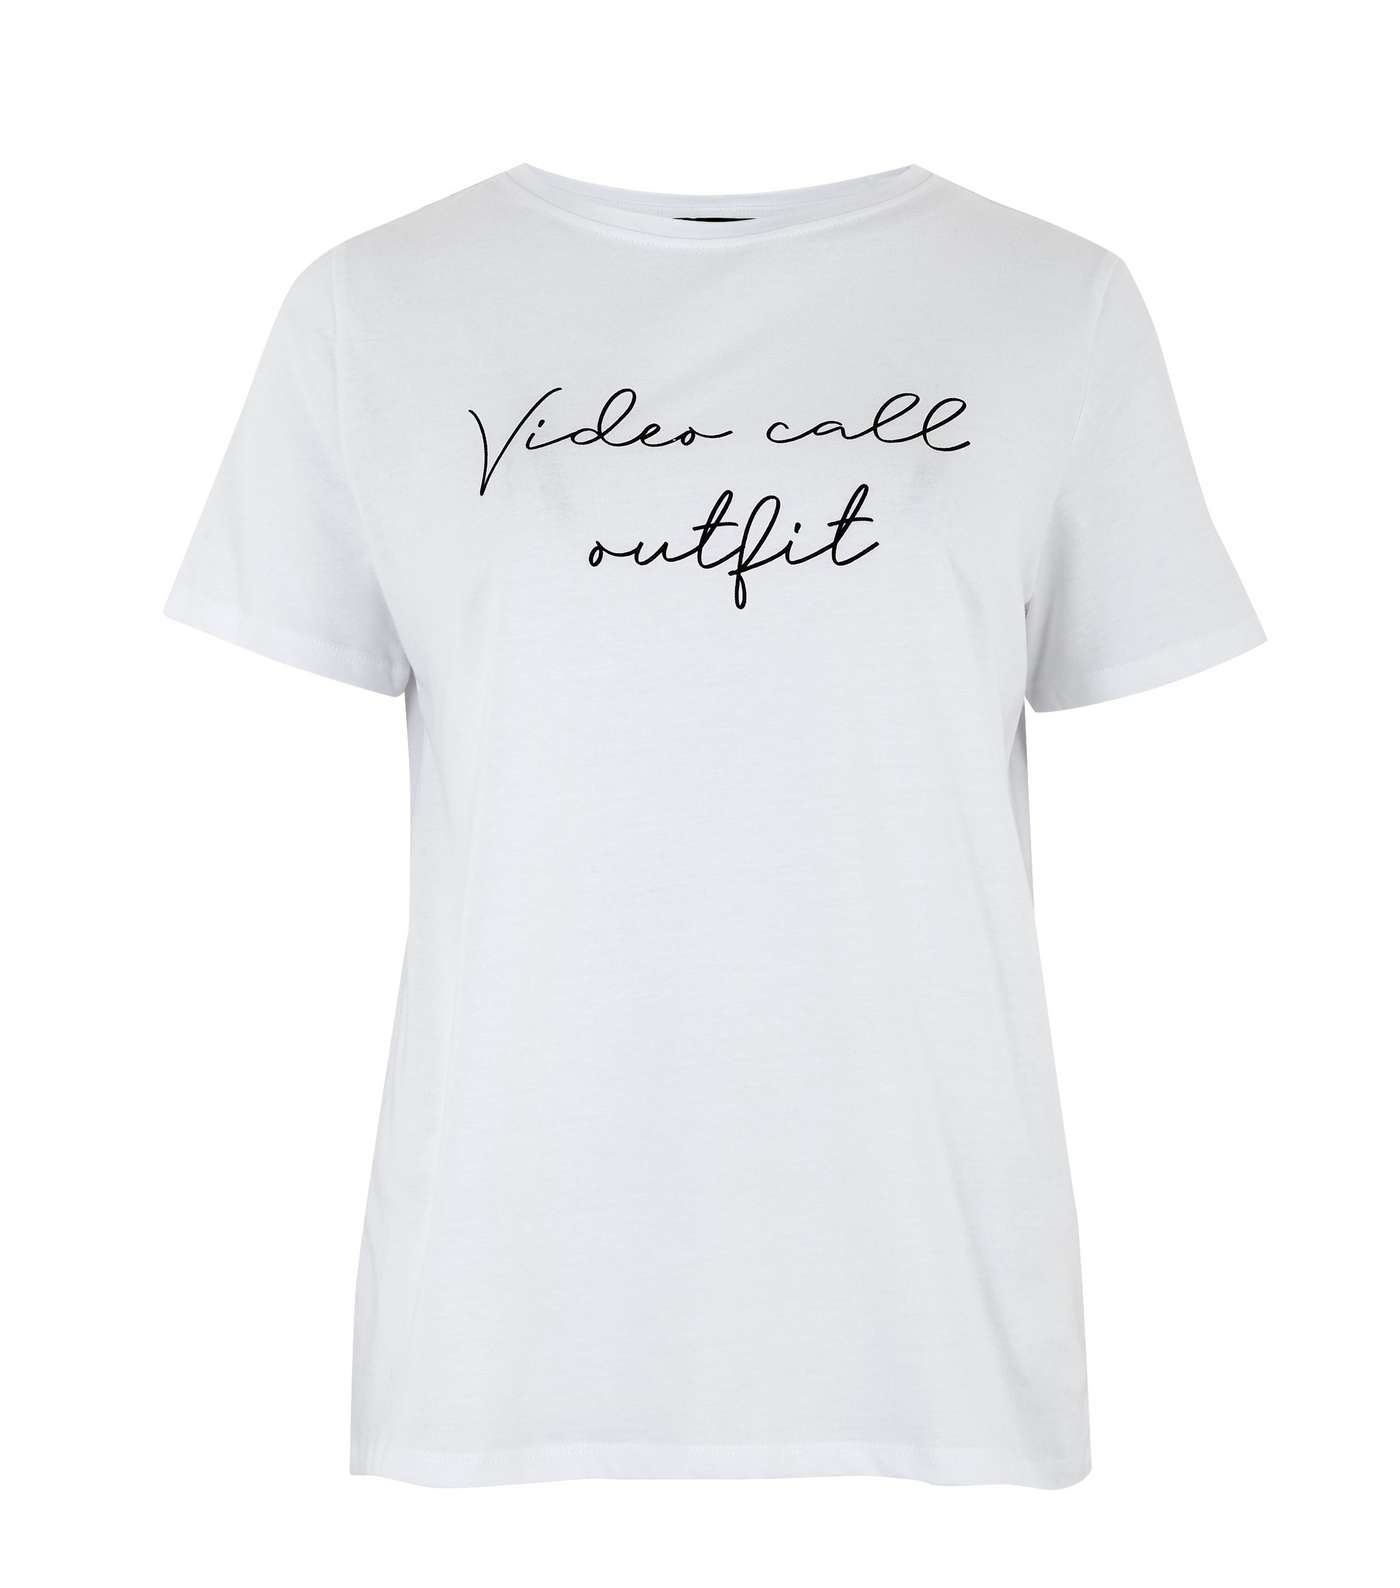 Petite White Video Call Outfit Slogan T-Shirt